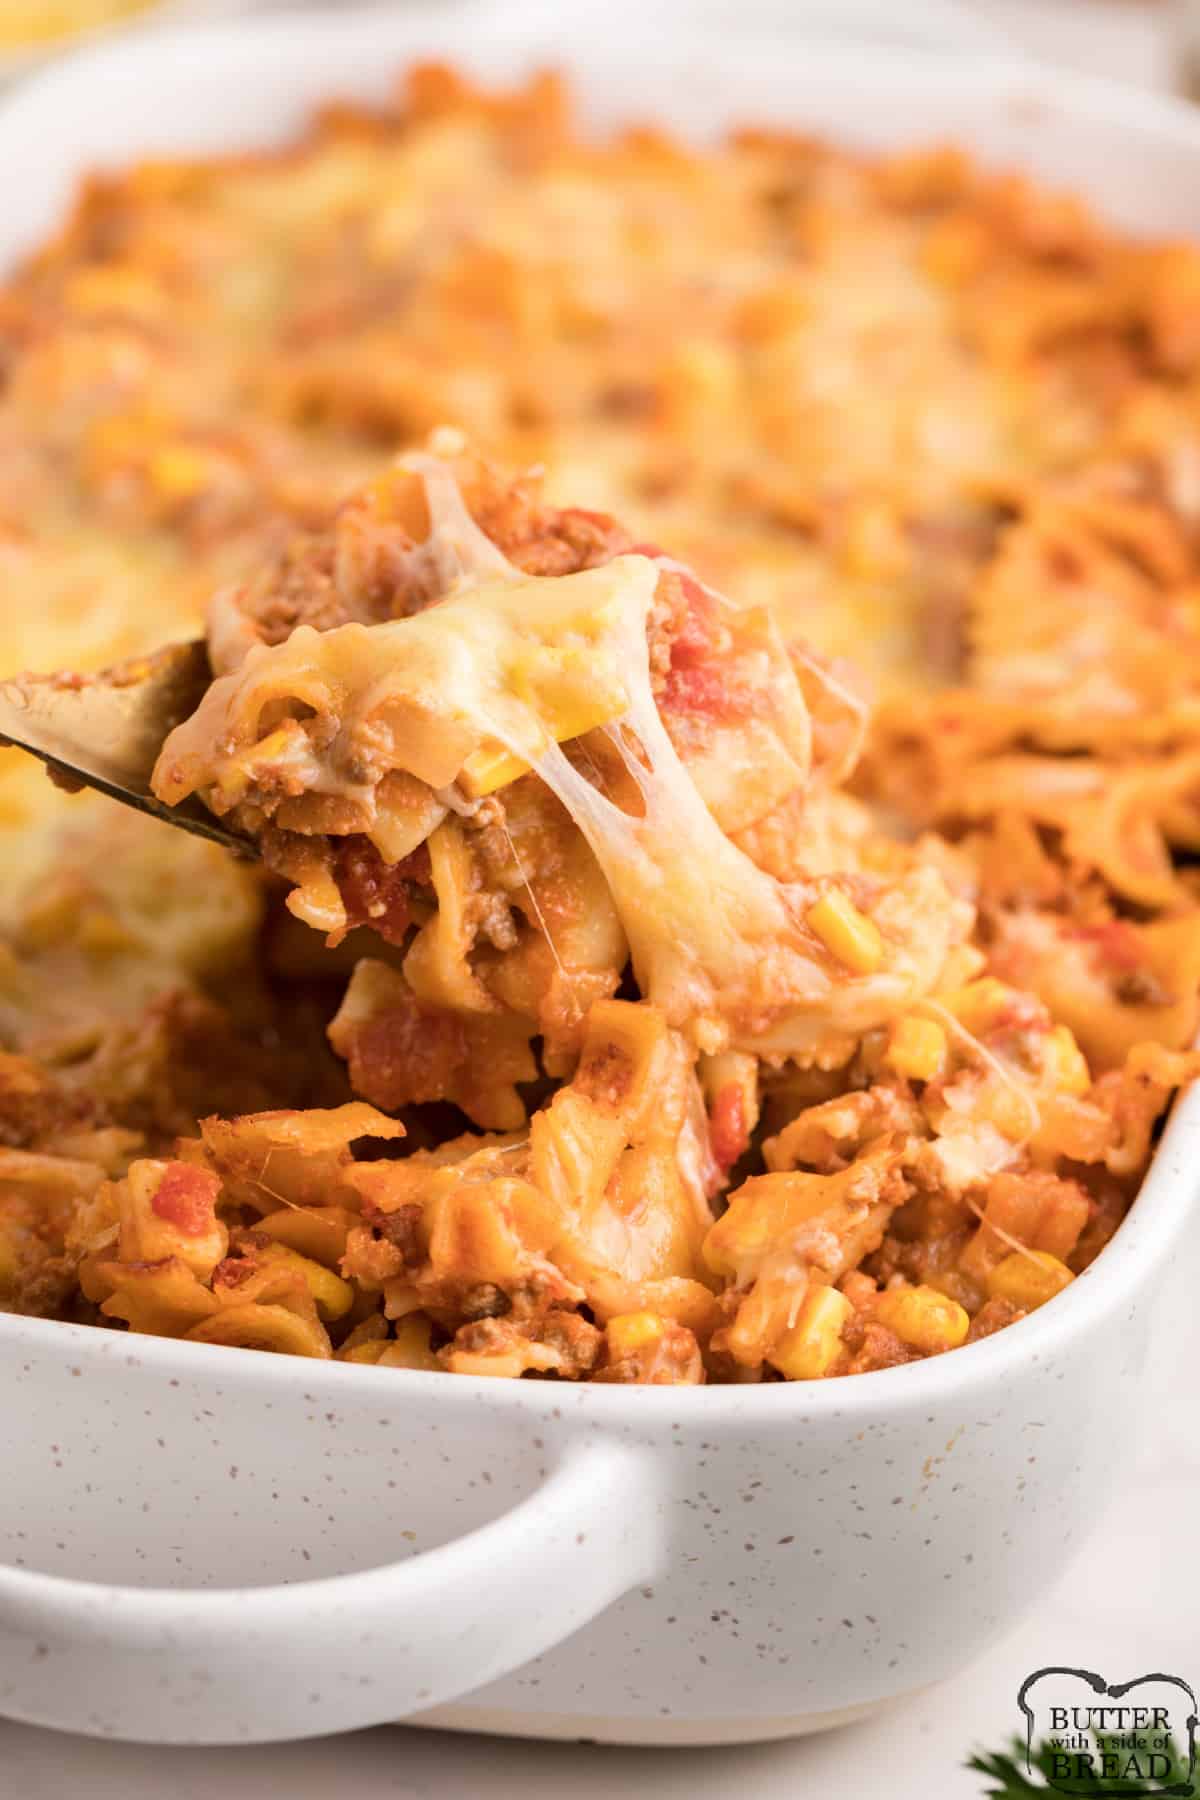 Sloppy Joe Casserole made with pasta coated in a ground beef, tomato and cheese based sauce, topped with yet more cheese and baked to perfection.  Easy weeknight dinner recipe that the whole family will enjoy! 